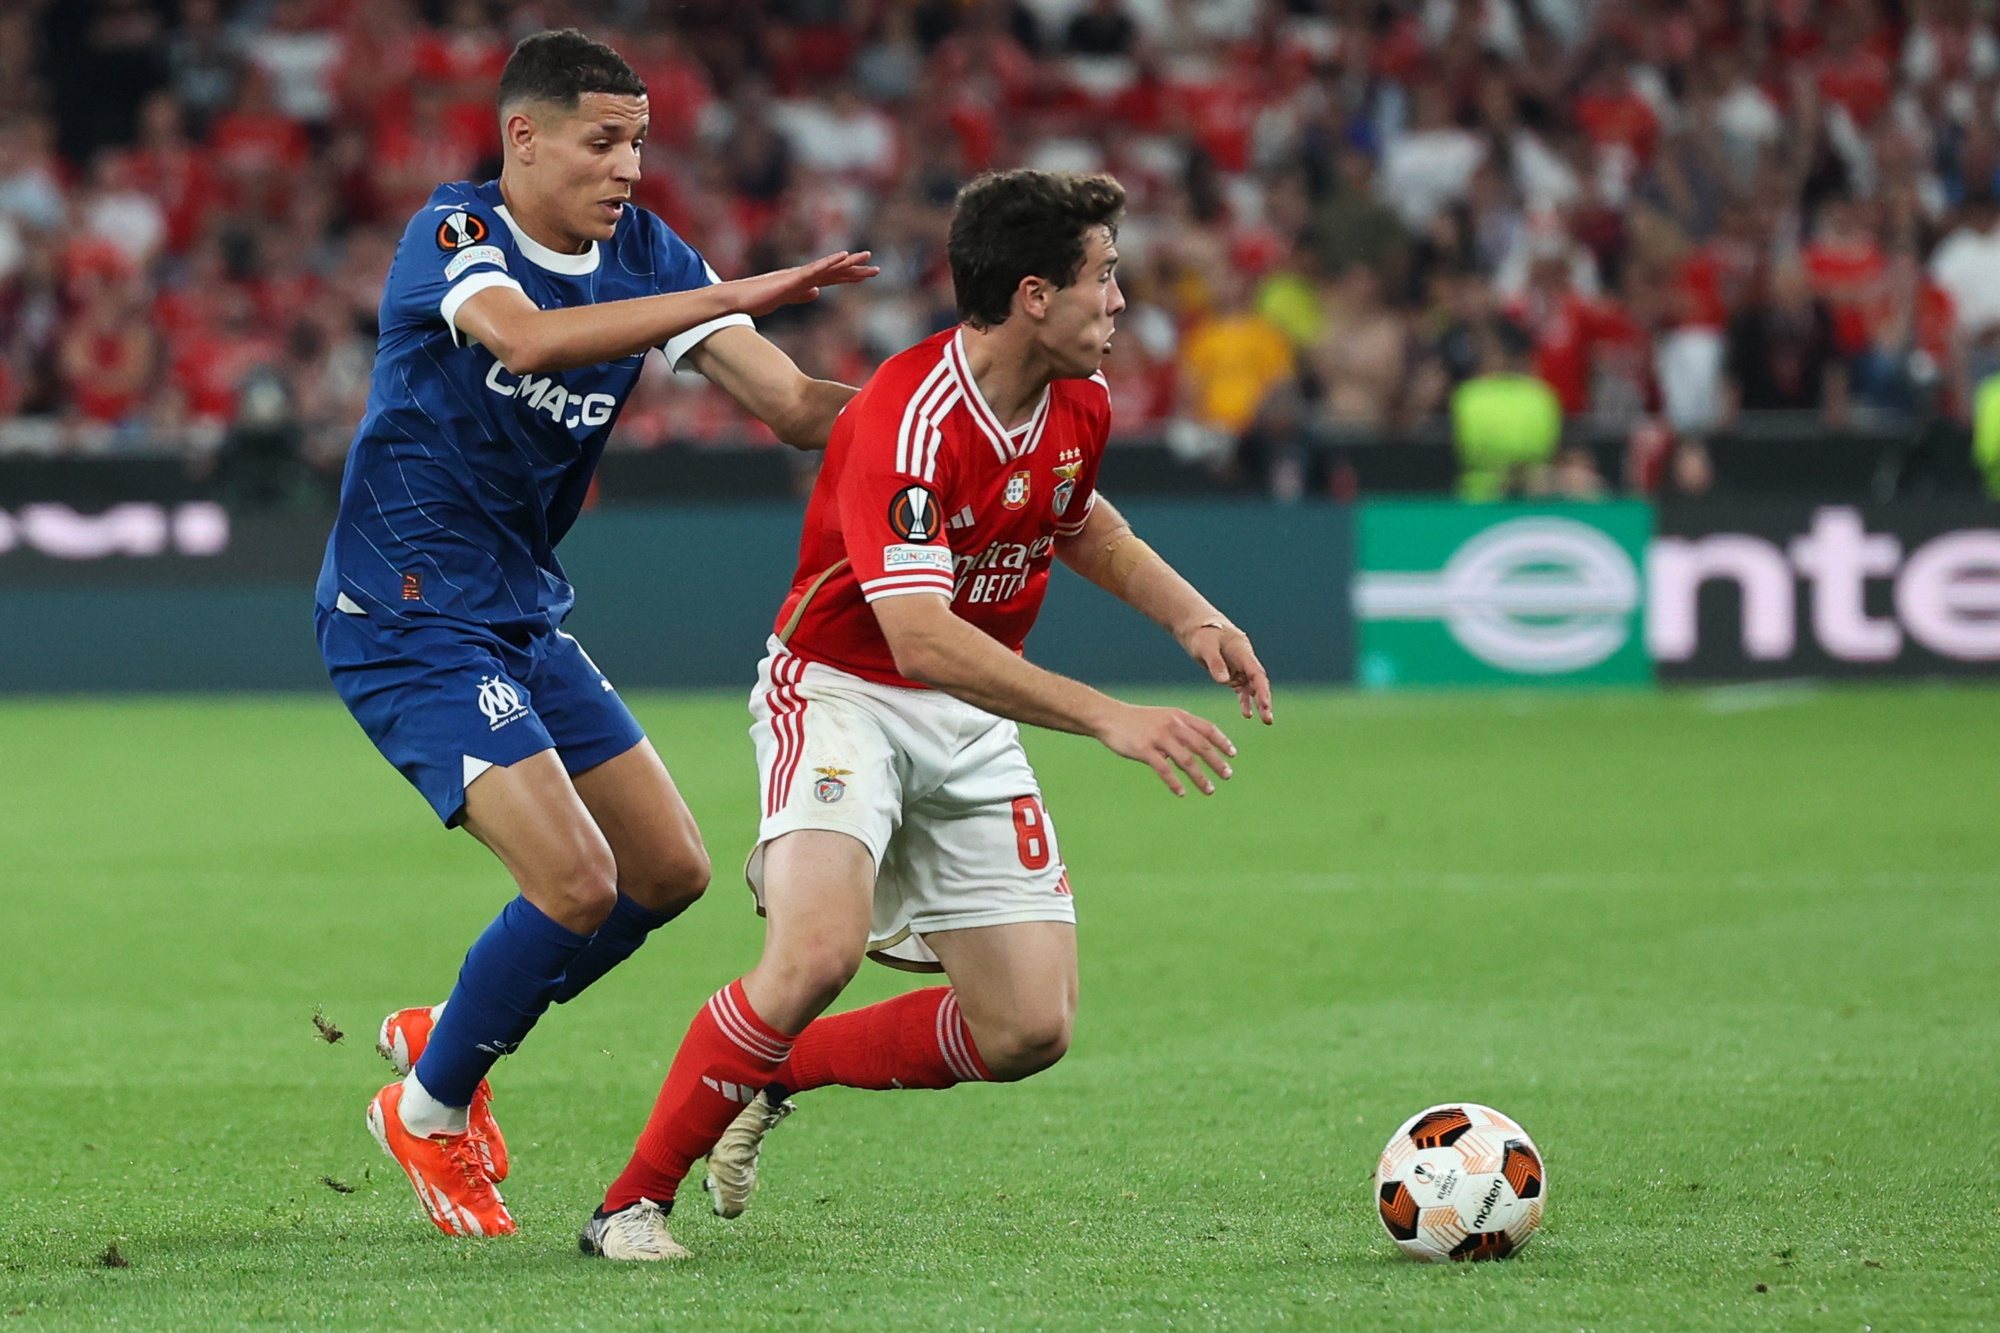 Benfica player Joao Neves (R) in action against Olympique de Marseille Amine Harit during the UEFA Europe League quarter-final first leg soccer match between Benfica and Olympique de Marseille held at Luz Stadium, in Lisbon, Portugal, 11 April 2024. MANUEL DE ALMEIDA/LUSA